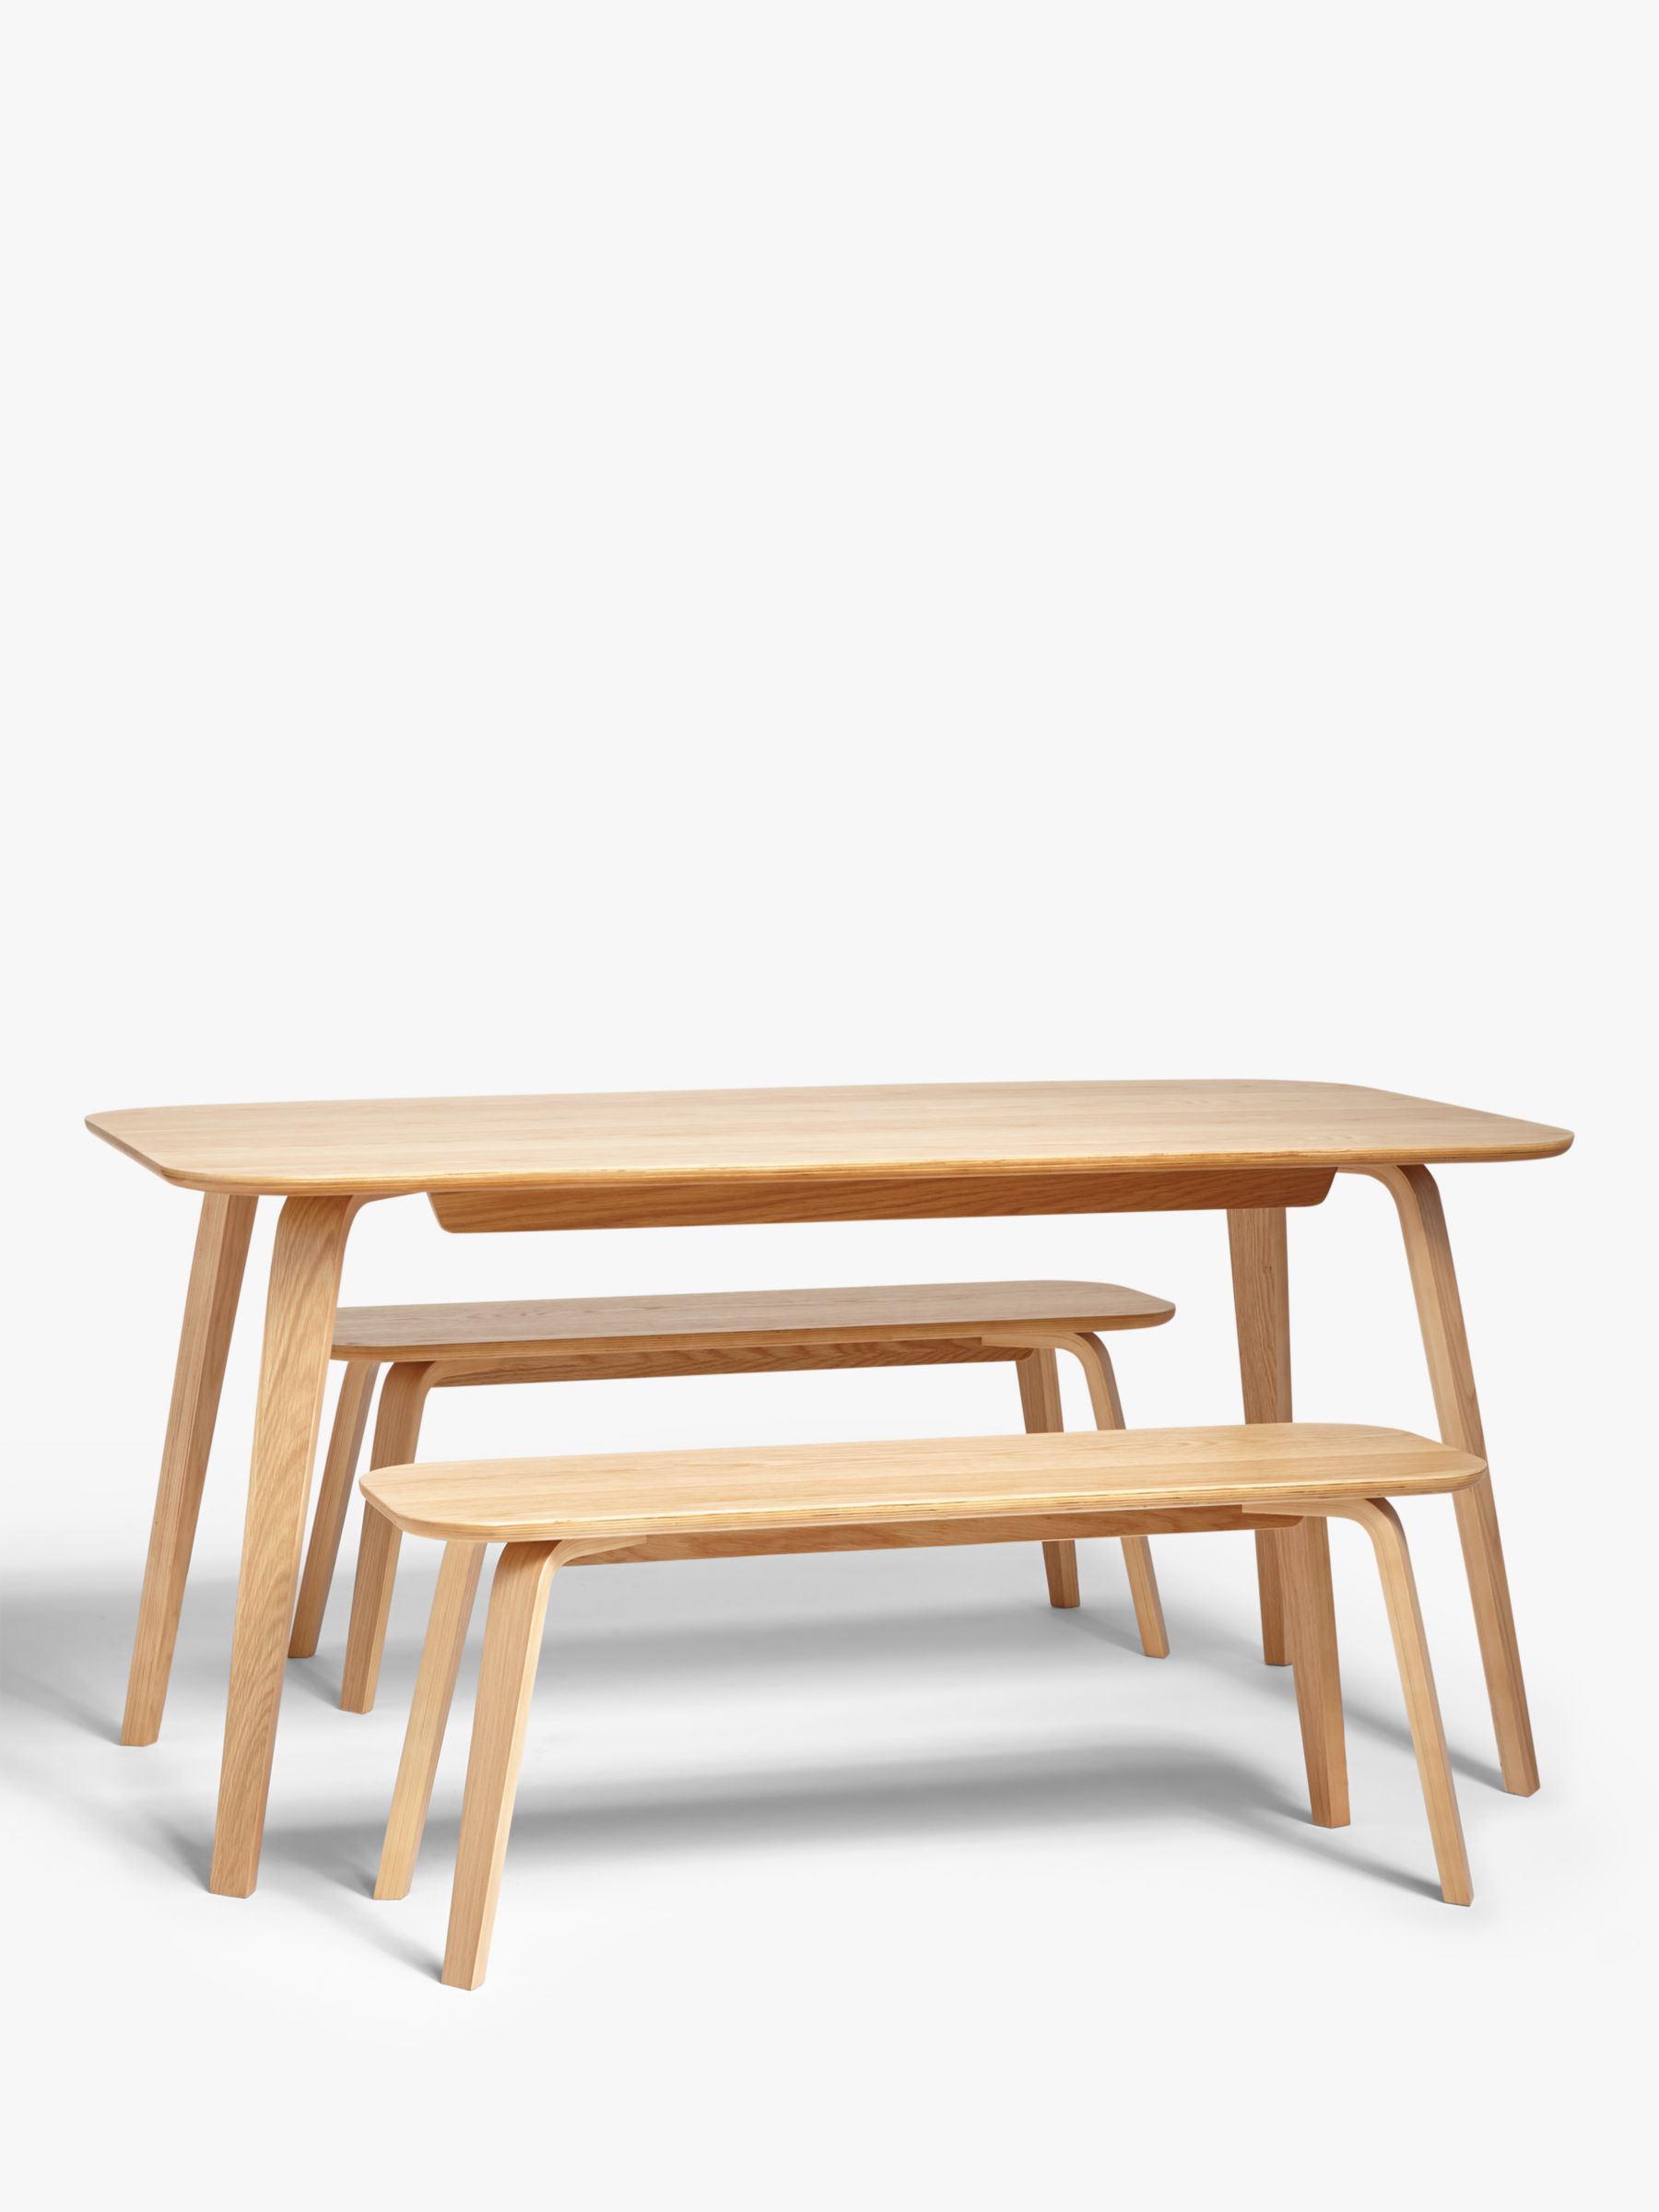 John Lewis ANYDAY Anton 6 Seater Dining Table and 3 Seater Benches, Oak